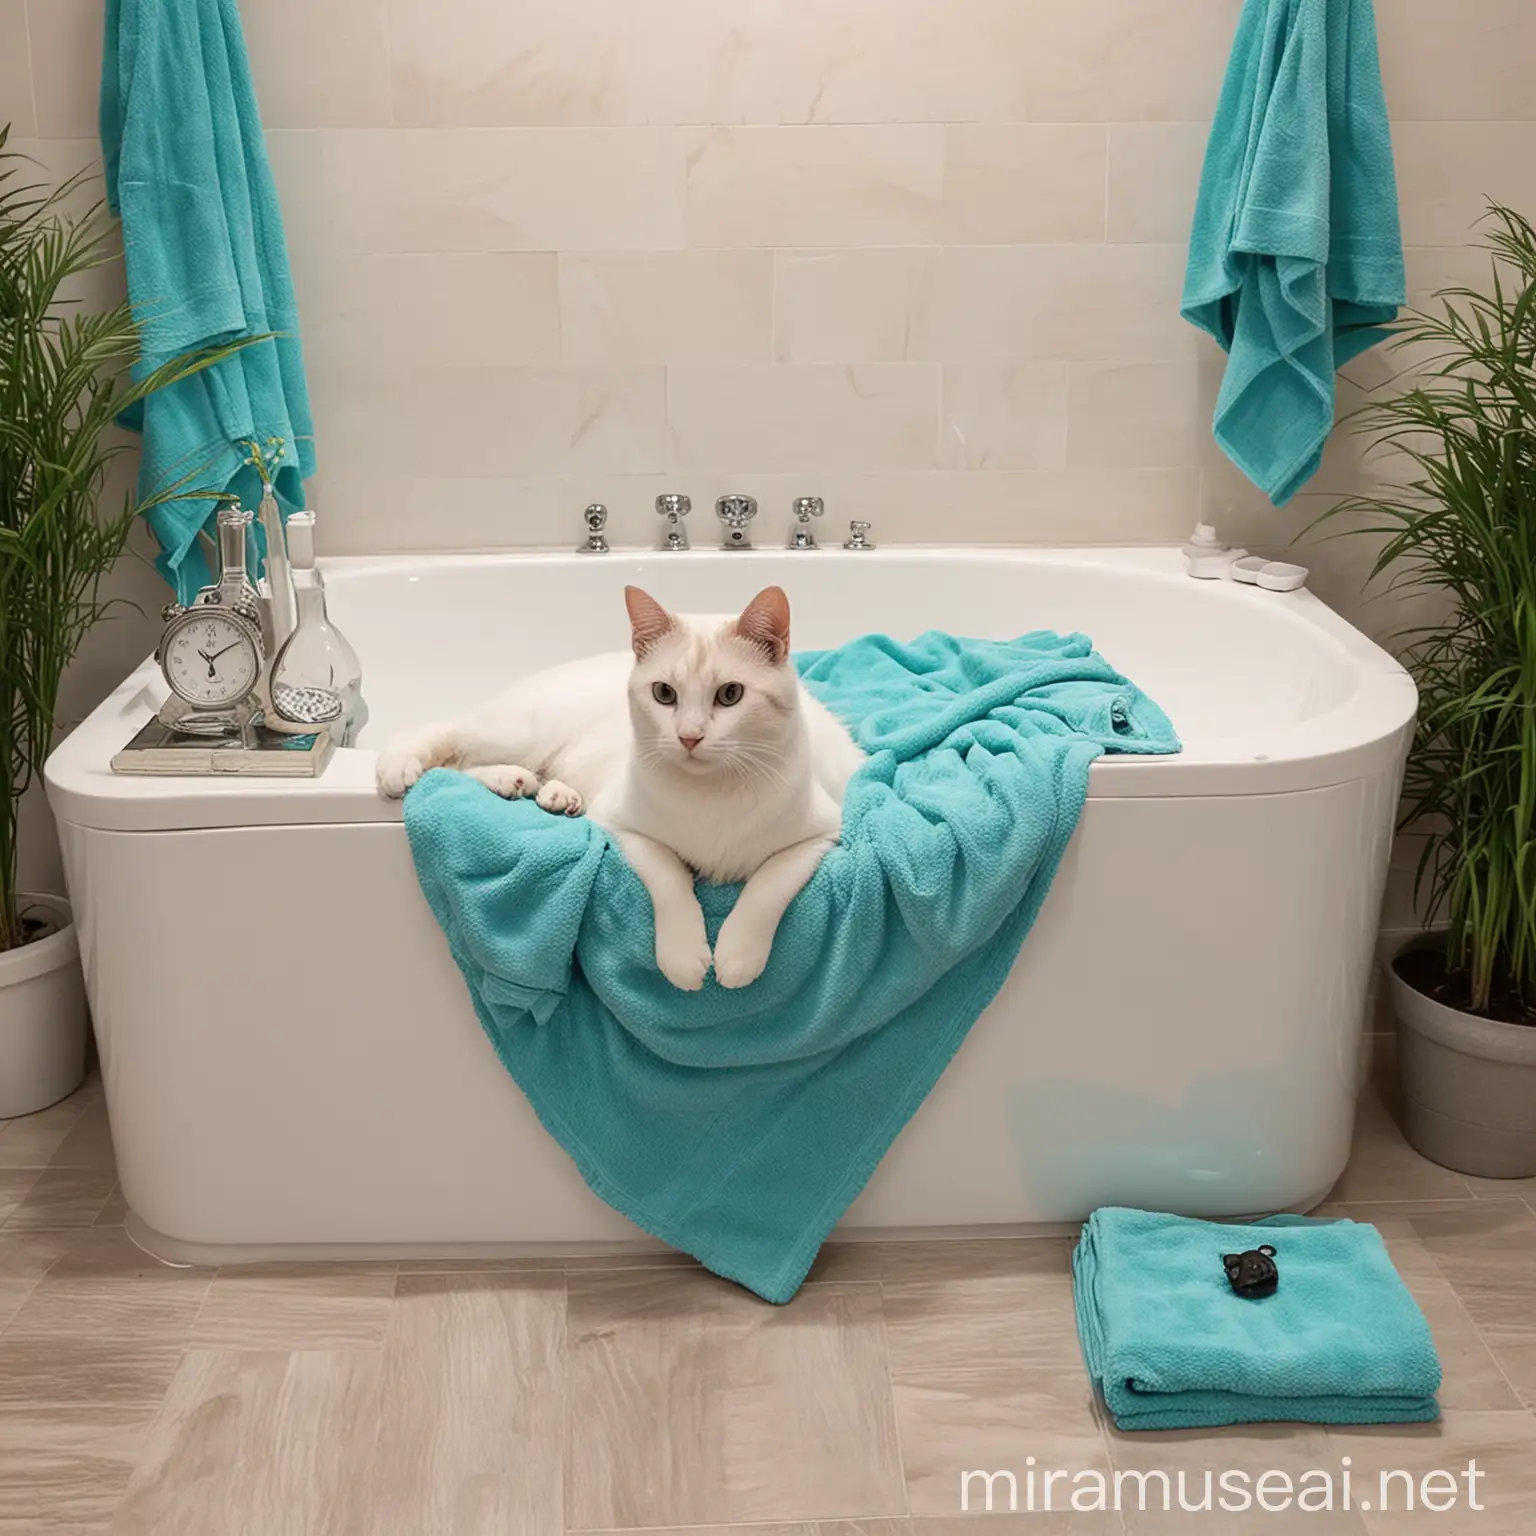 Cat Relaxing in Jacuzzi with Turquoise Towels